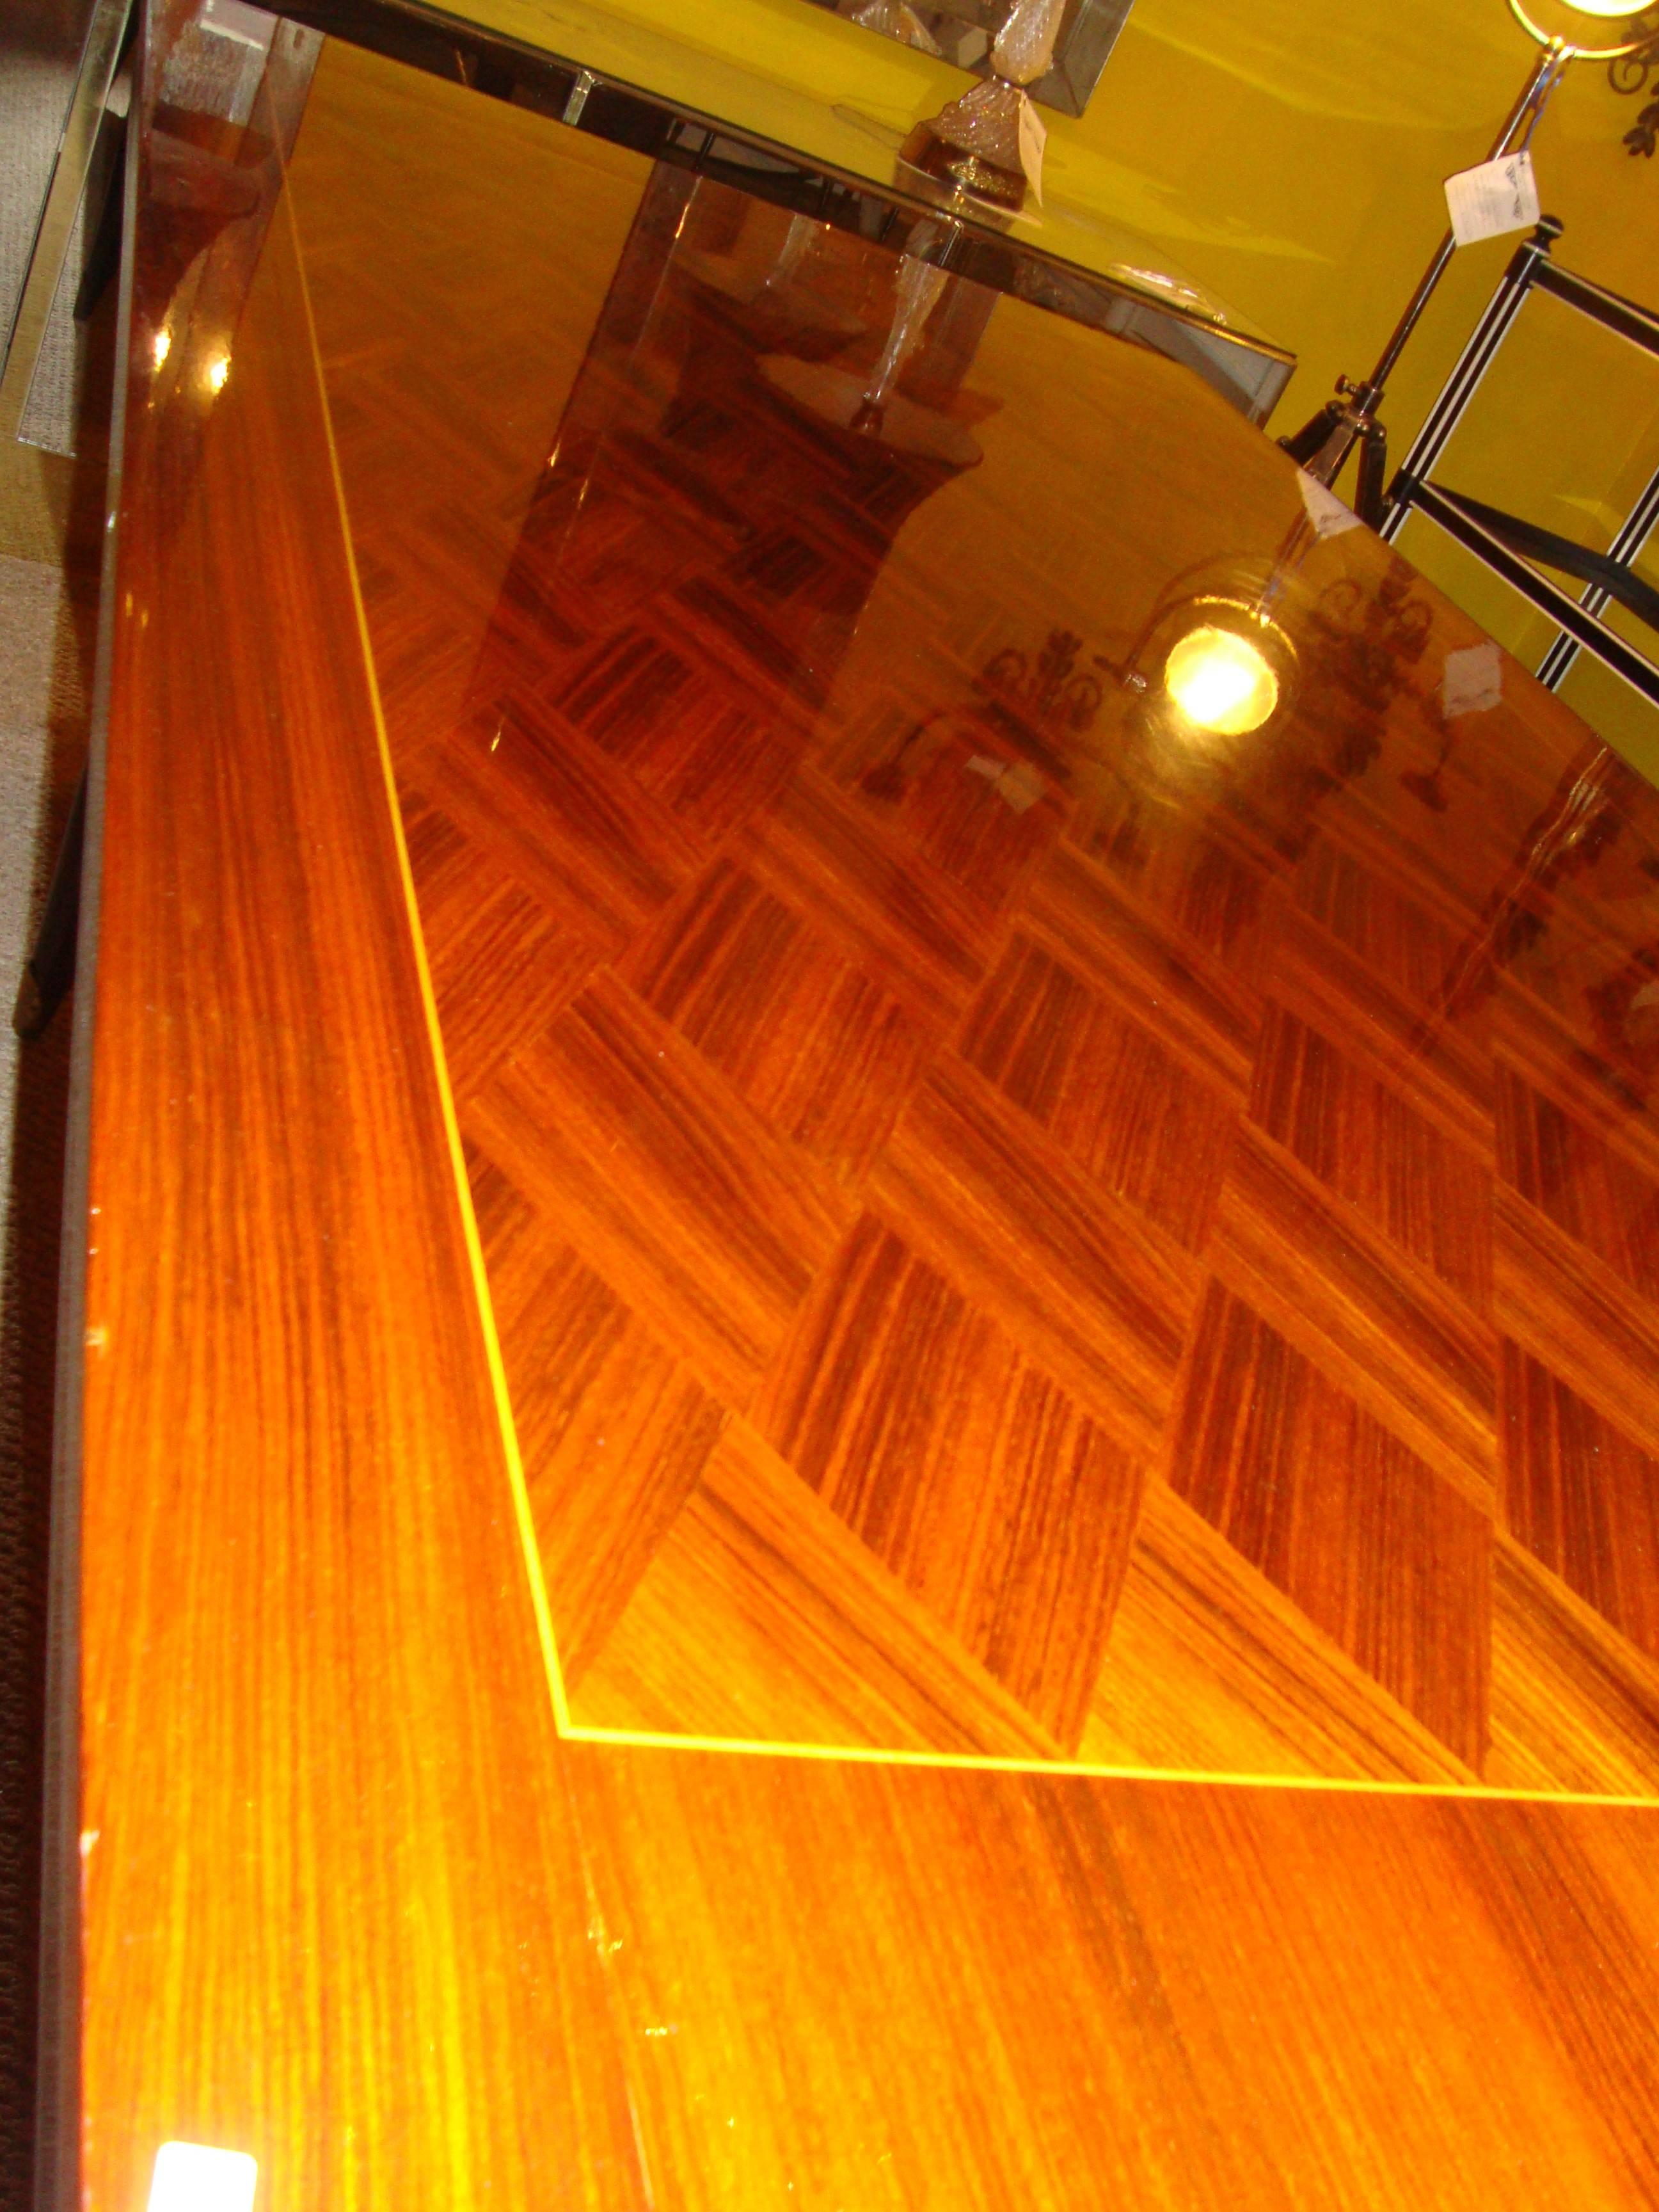 Mid-20th Century Italian Mid-Century Modern Parquetry Inlaid Dining Table Fine Exotic Wood